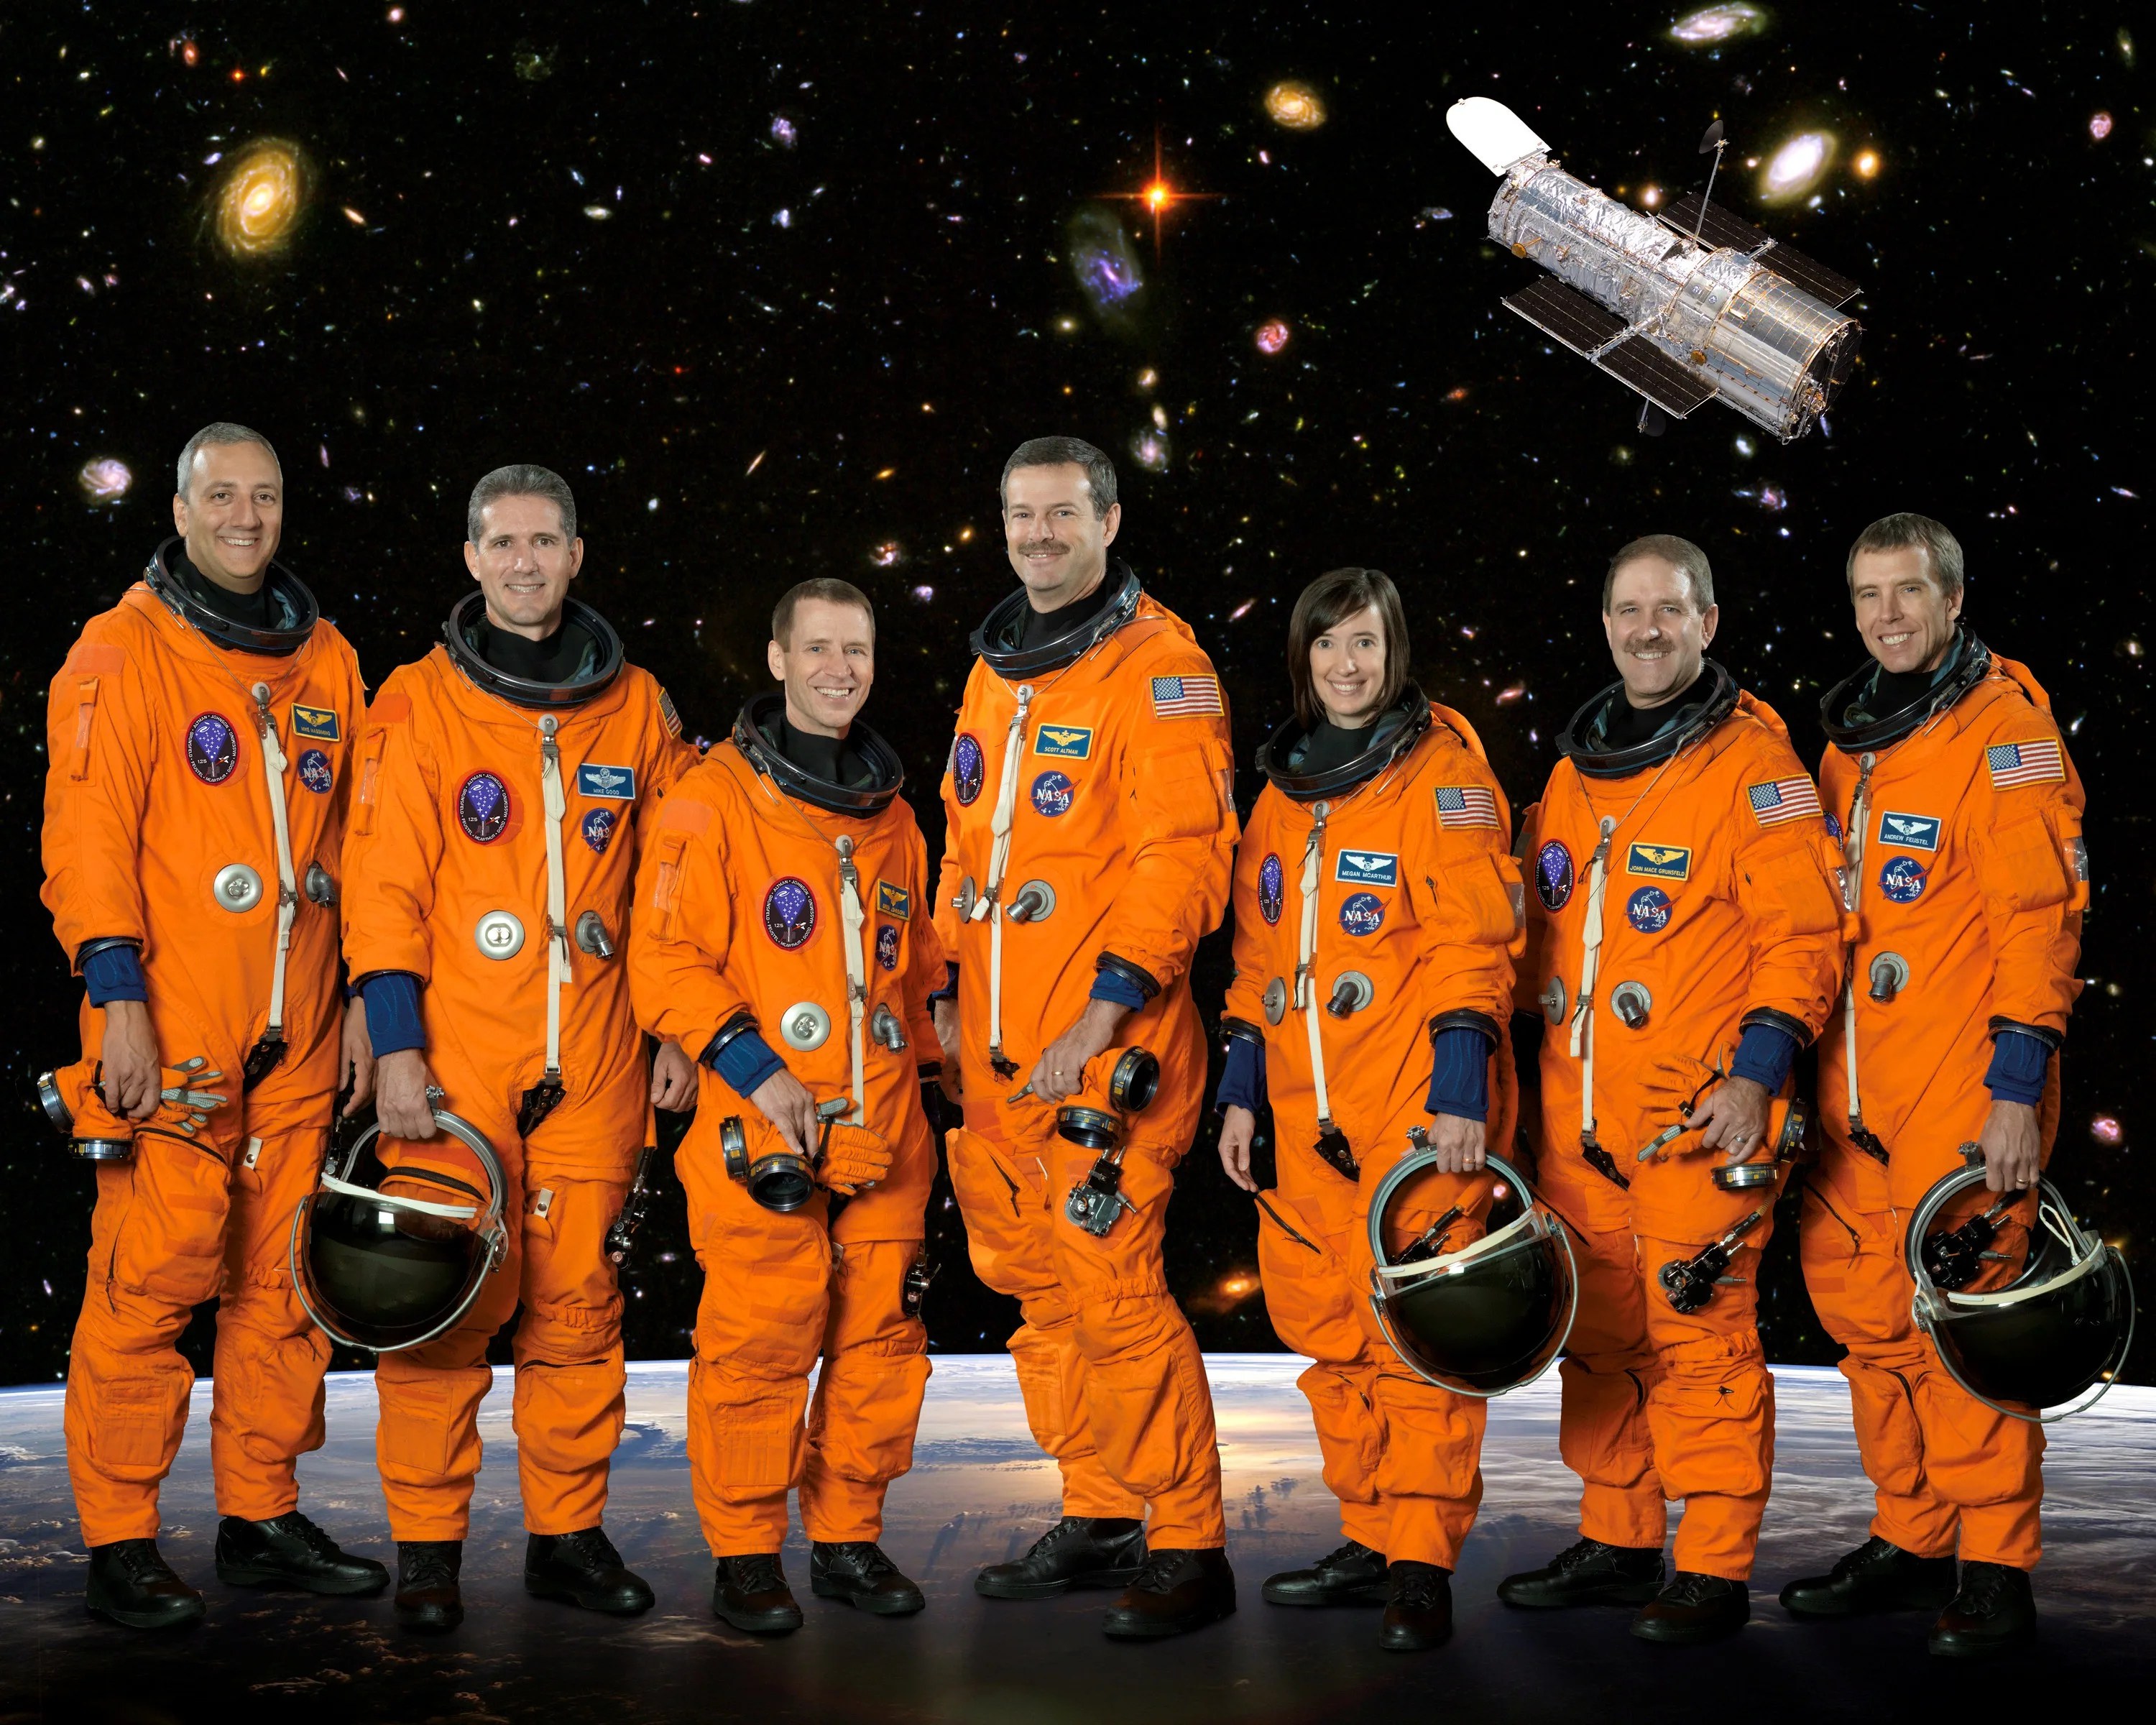 Seven astronauts--six men and one woman--stand in a line in orange astronaut suits, a few of them holding their helmets, with an image of the Hubble Ultra Deep Field in the background.